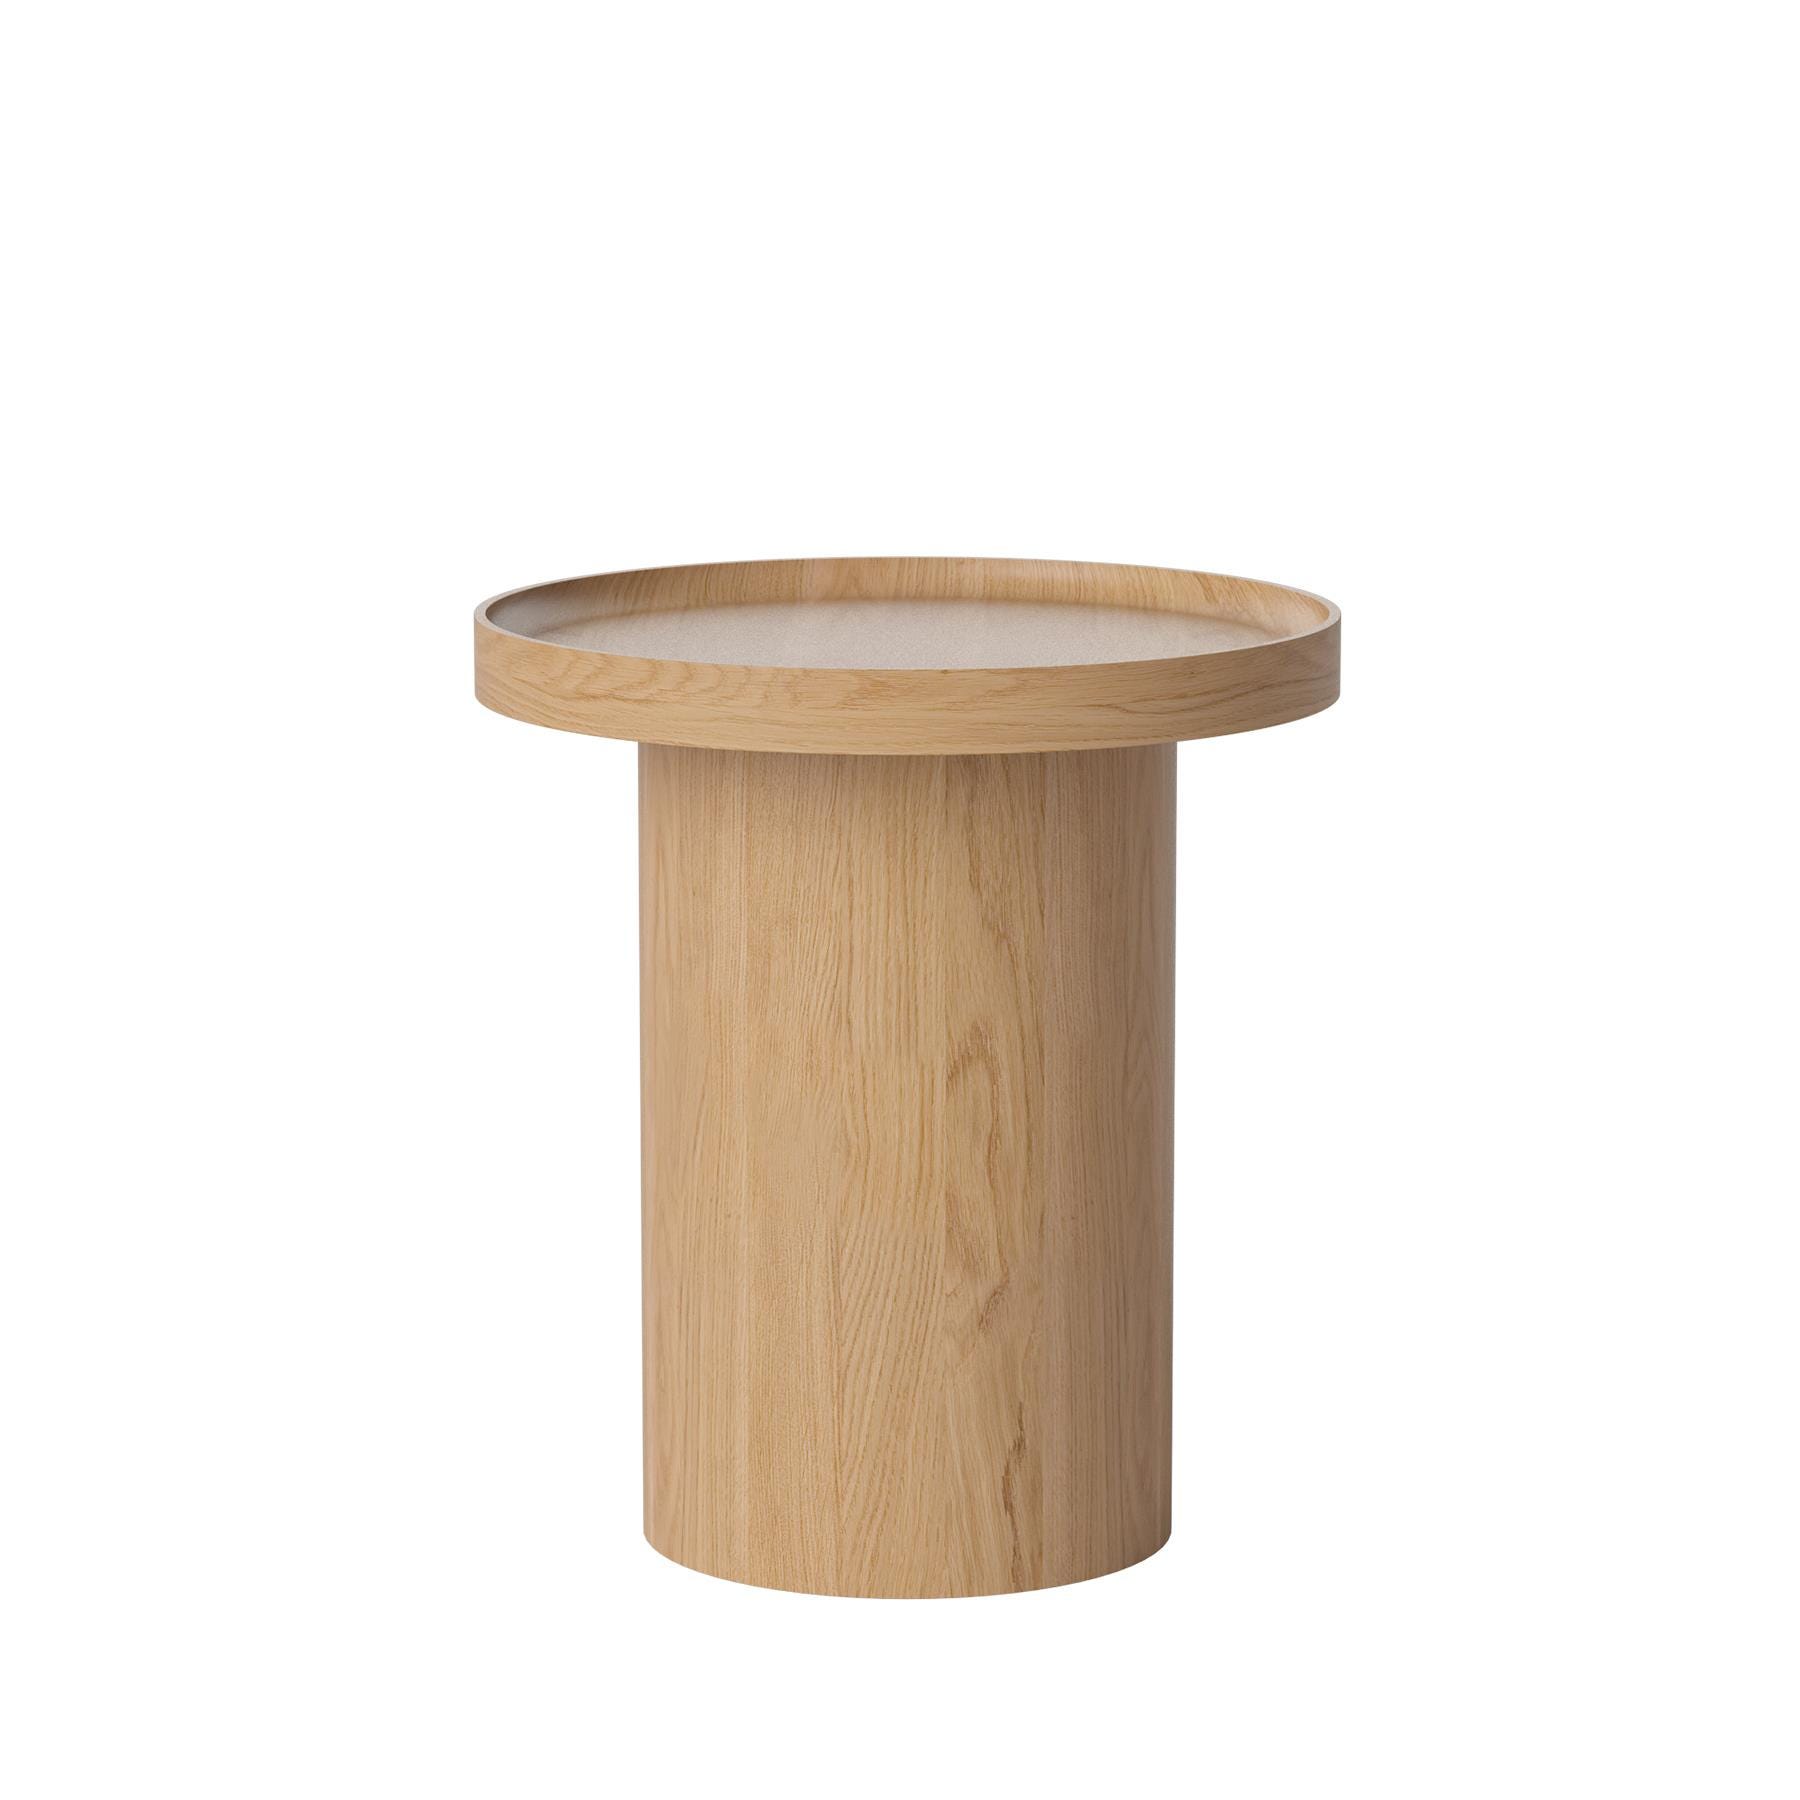 Bolia Plateau Coffee Table Small Lacquered Oak Light Wood Designer Furniture From Holloways Of Ludlow